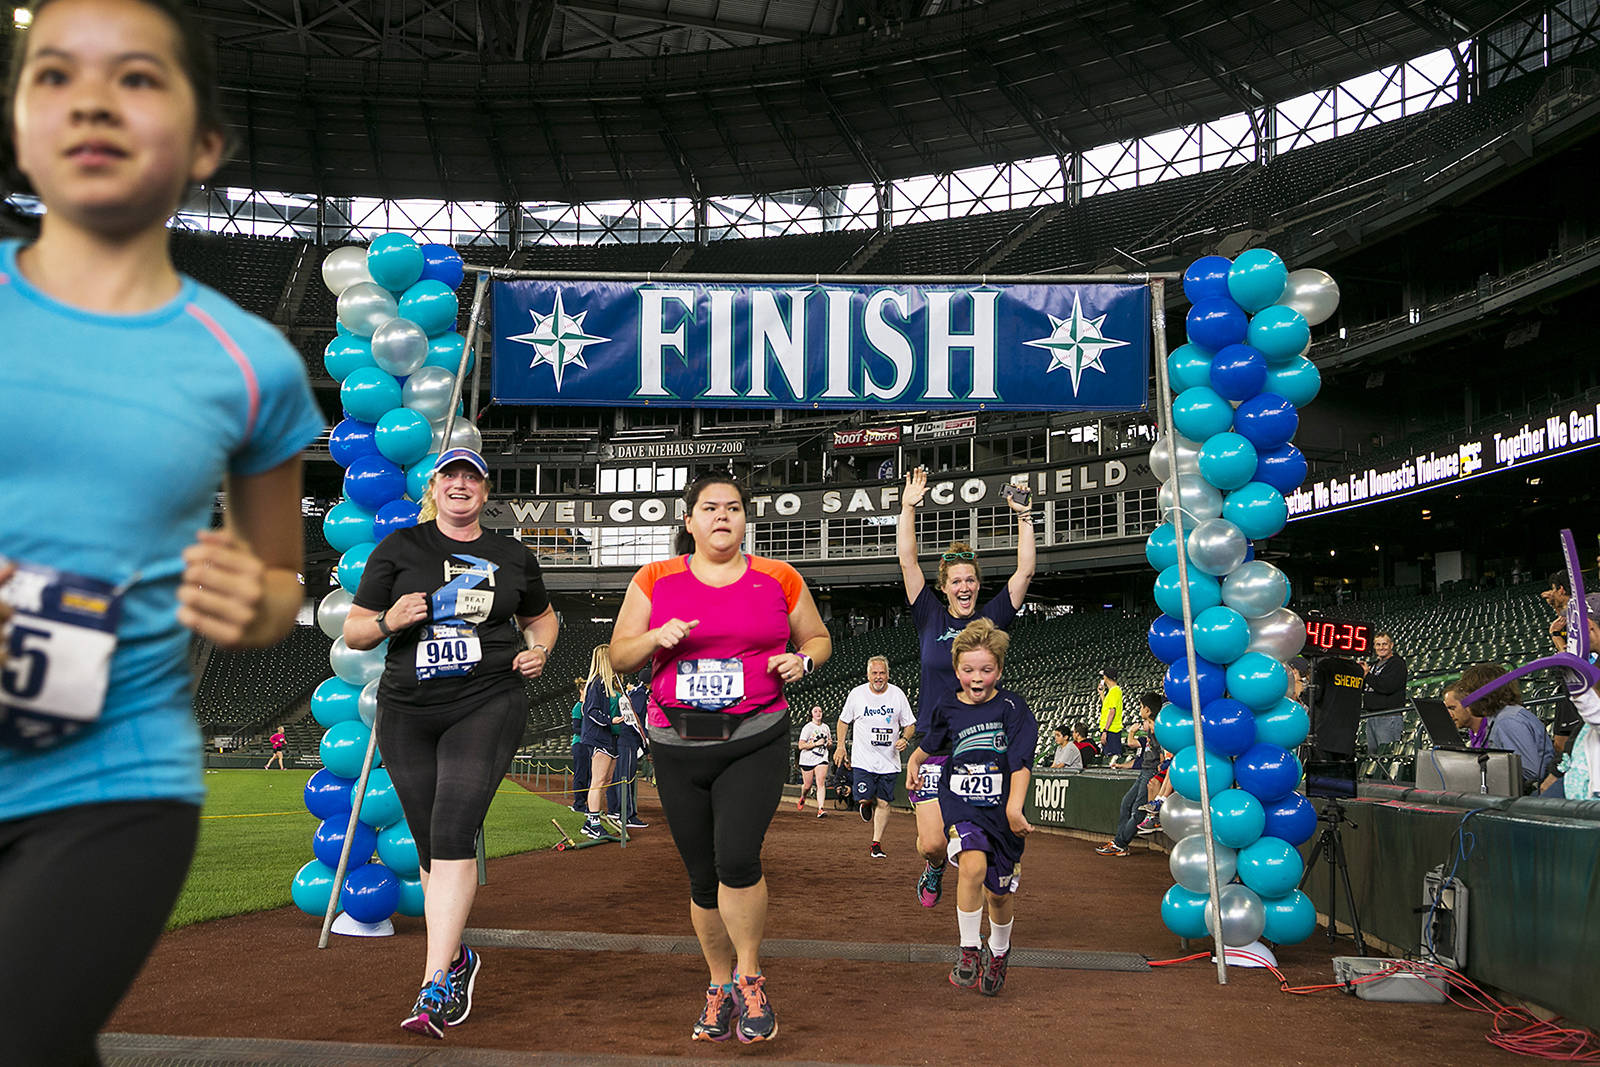 Domestic violence IS preventable: July 21’s Refuse To Abuse 5k is a unique run/walk through every level of Safeco Field, from the players’ tunnel to the final lap around the field.